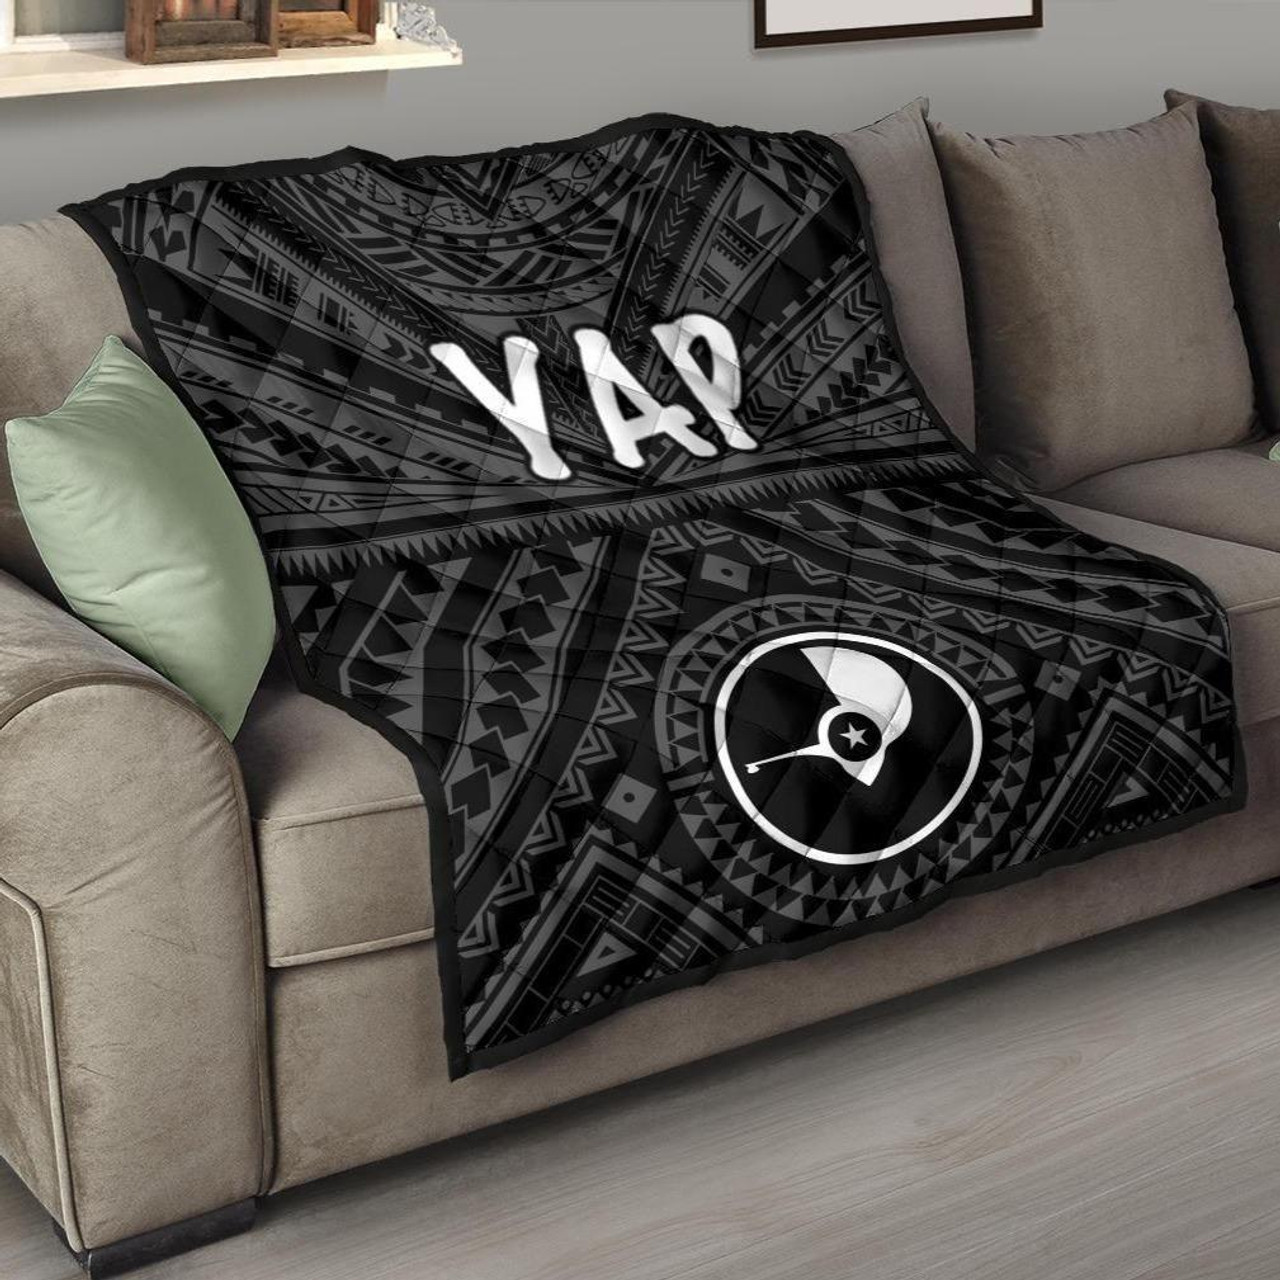 Yap Premium Quilt - Yap Seal With Polynesian Tattoo Style 1